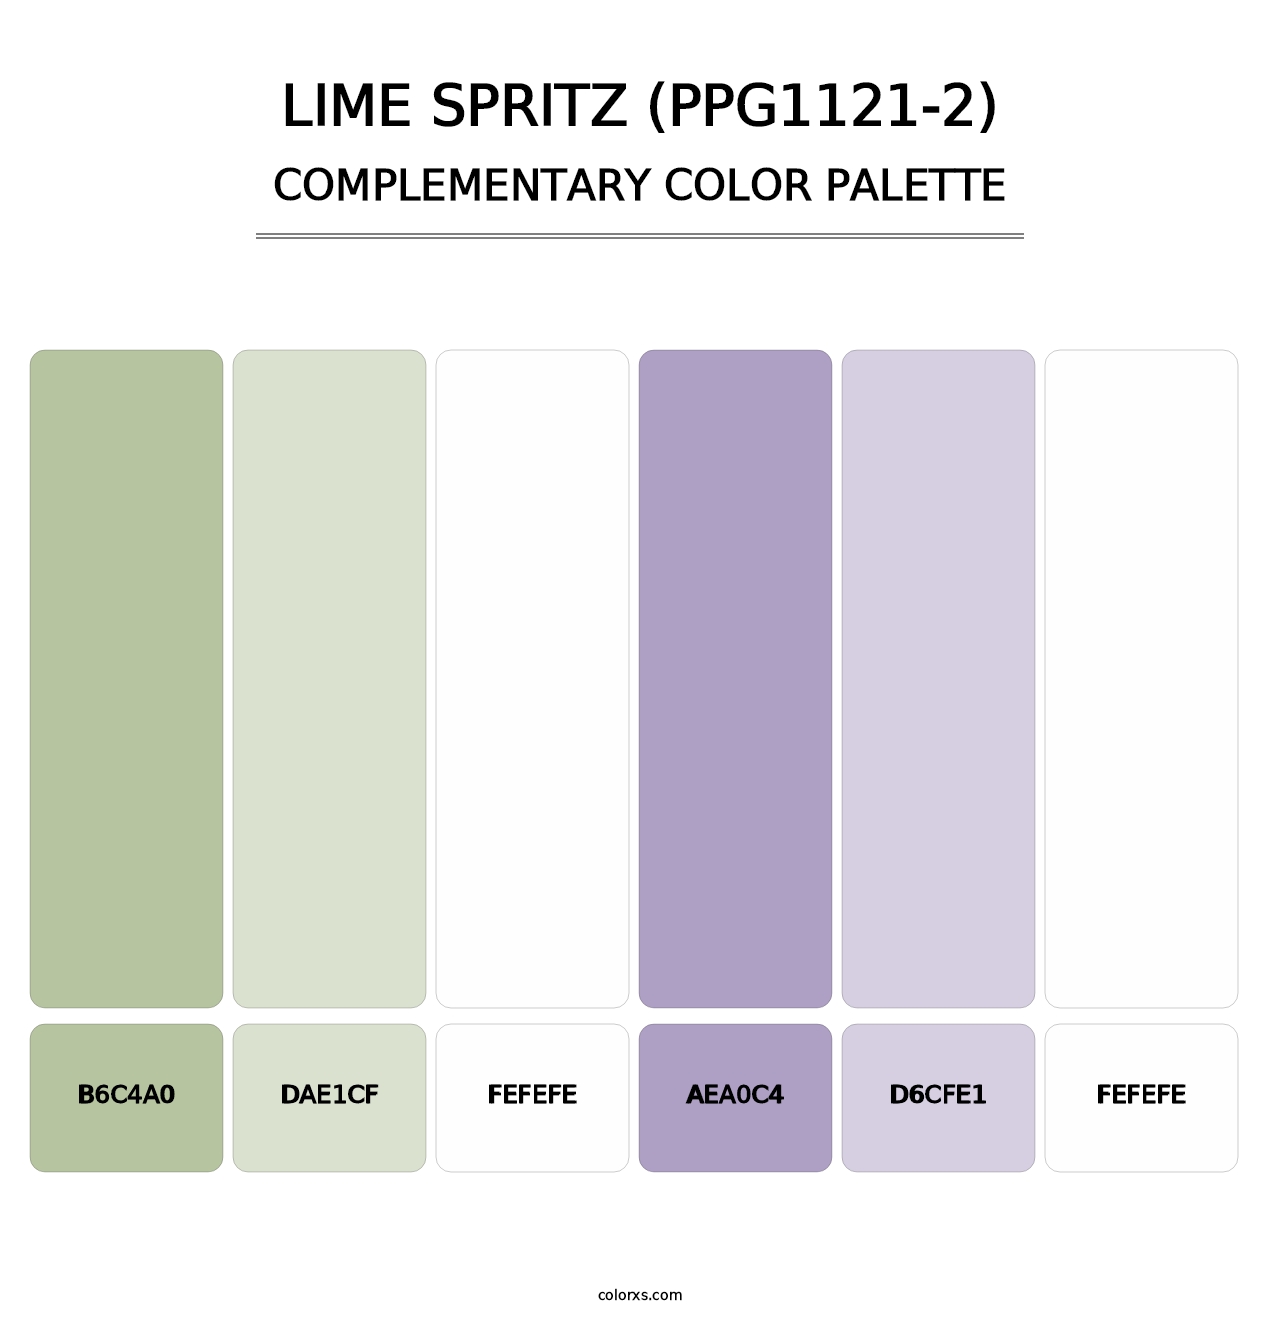 Lime Spritz (PPG1121-2) - Complementary Color Palette